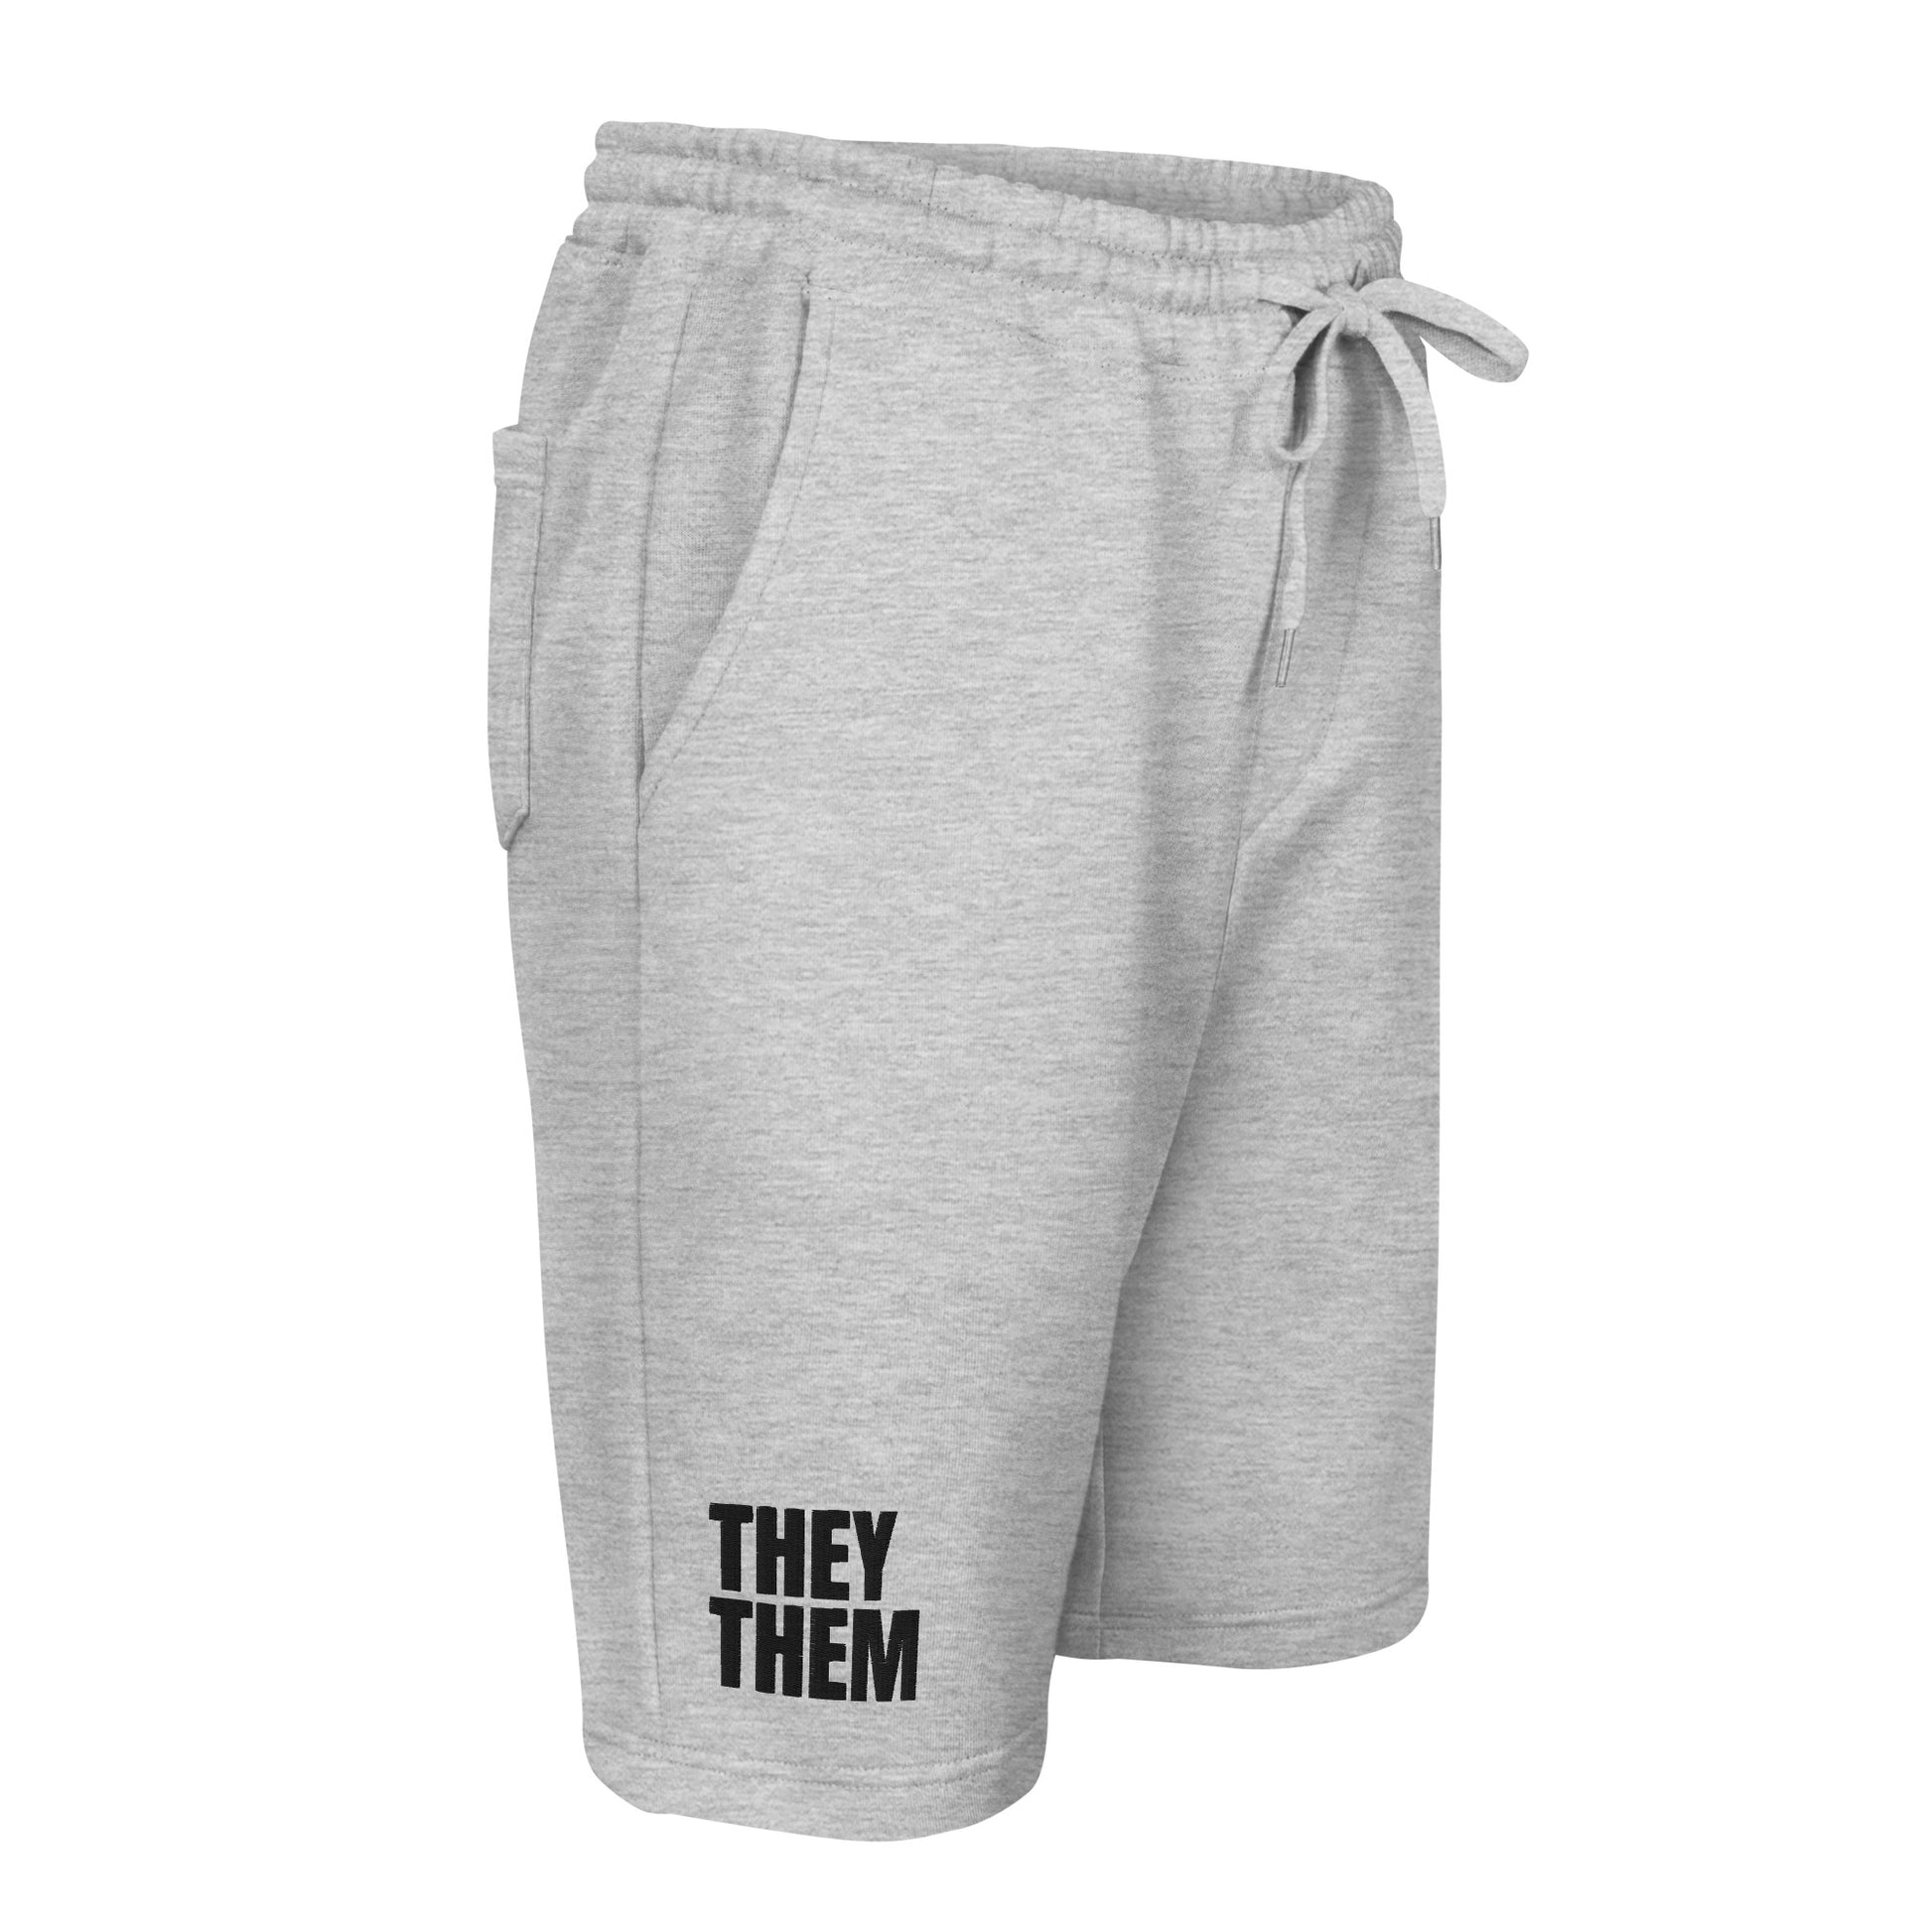 They/ Them fleece shorts - Rose Gold Co. Shop